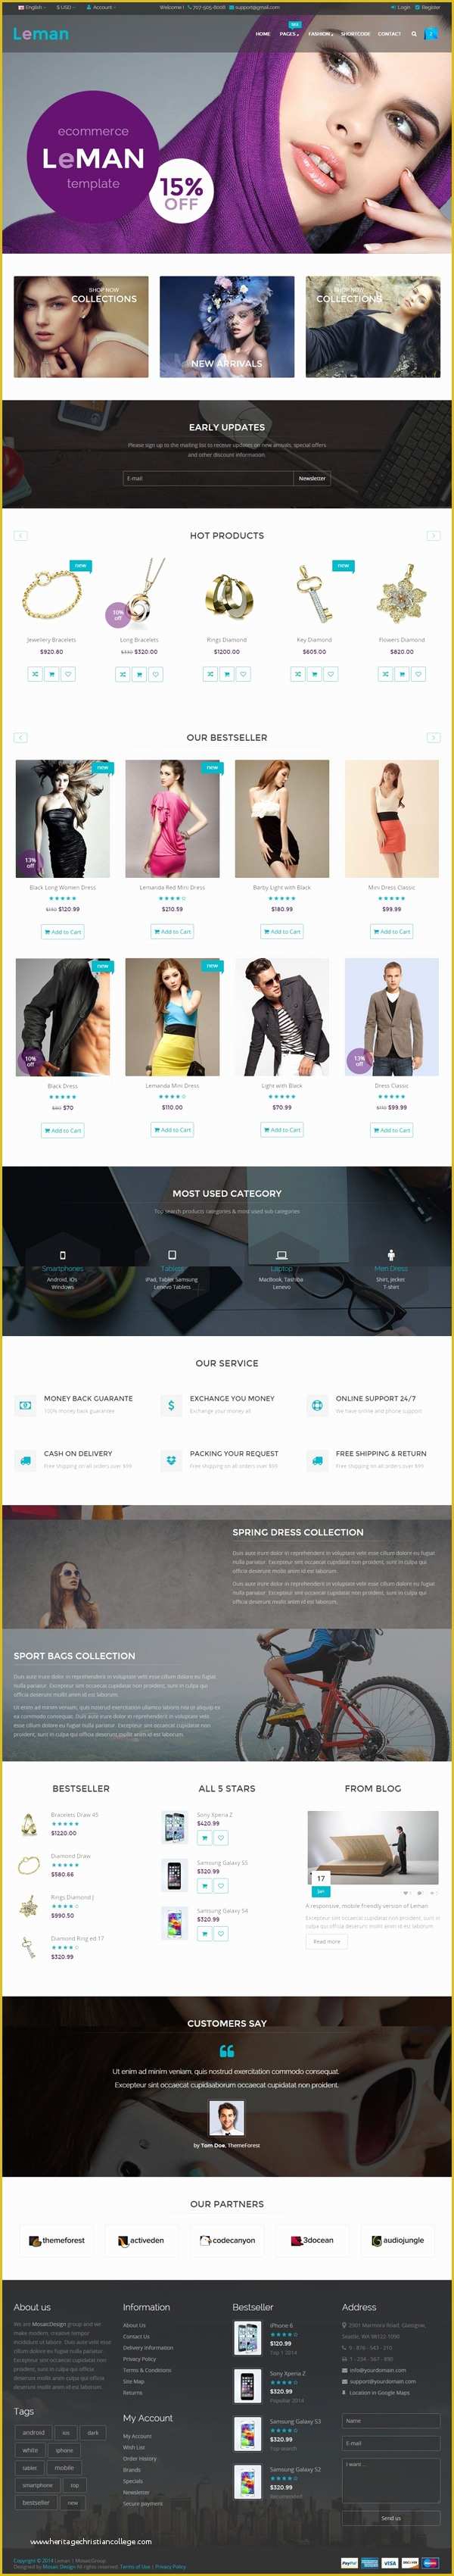 Ecommerce Website Templates Free Download In HTML5 Css3 Of Lovely Responsive HTML5 Css3 Website Templates